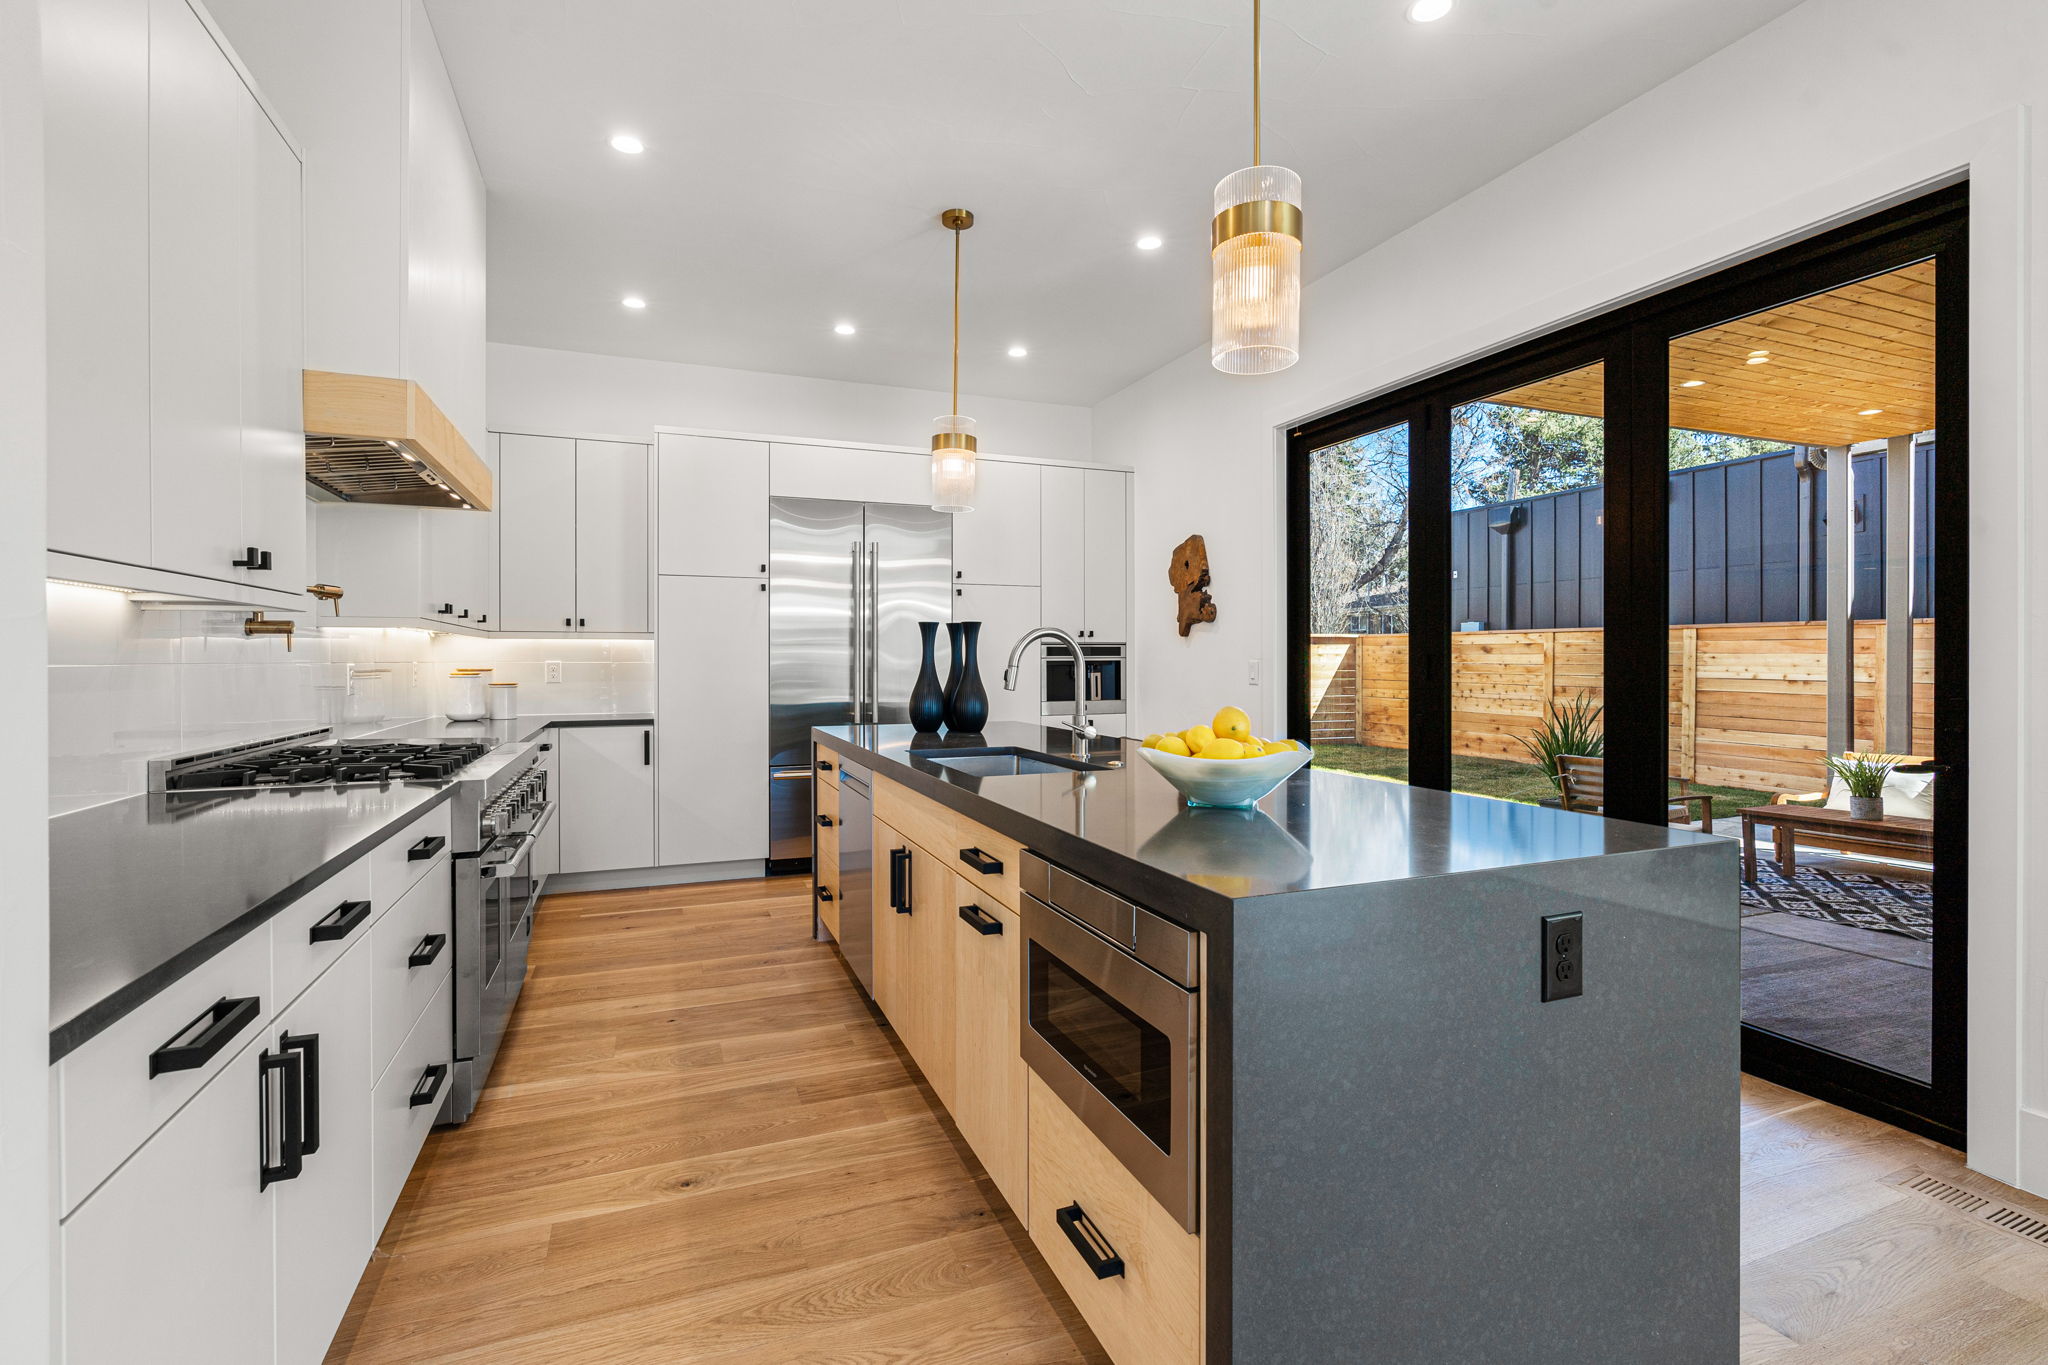 Equipped with mixed metals, unique details, waterfall quartz counters, and high-end JennAir stainless appliances.